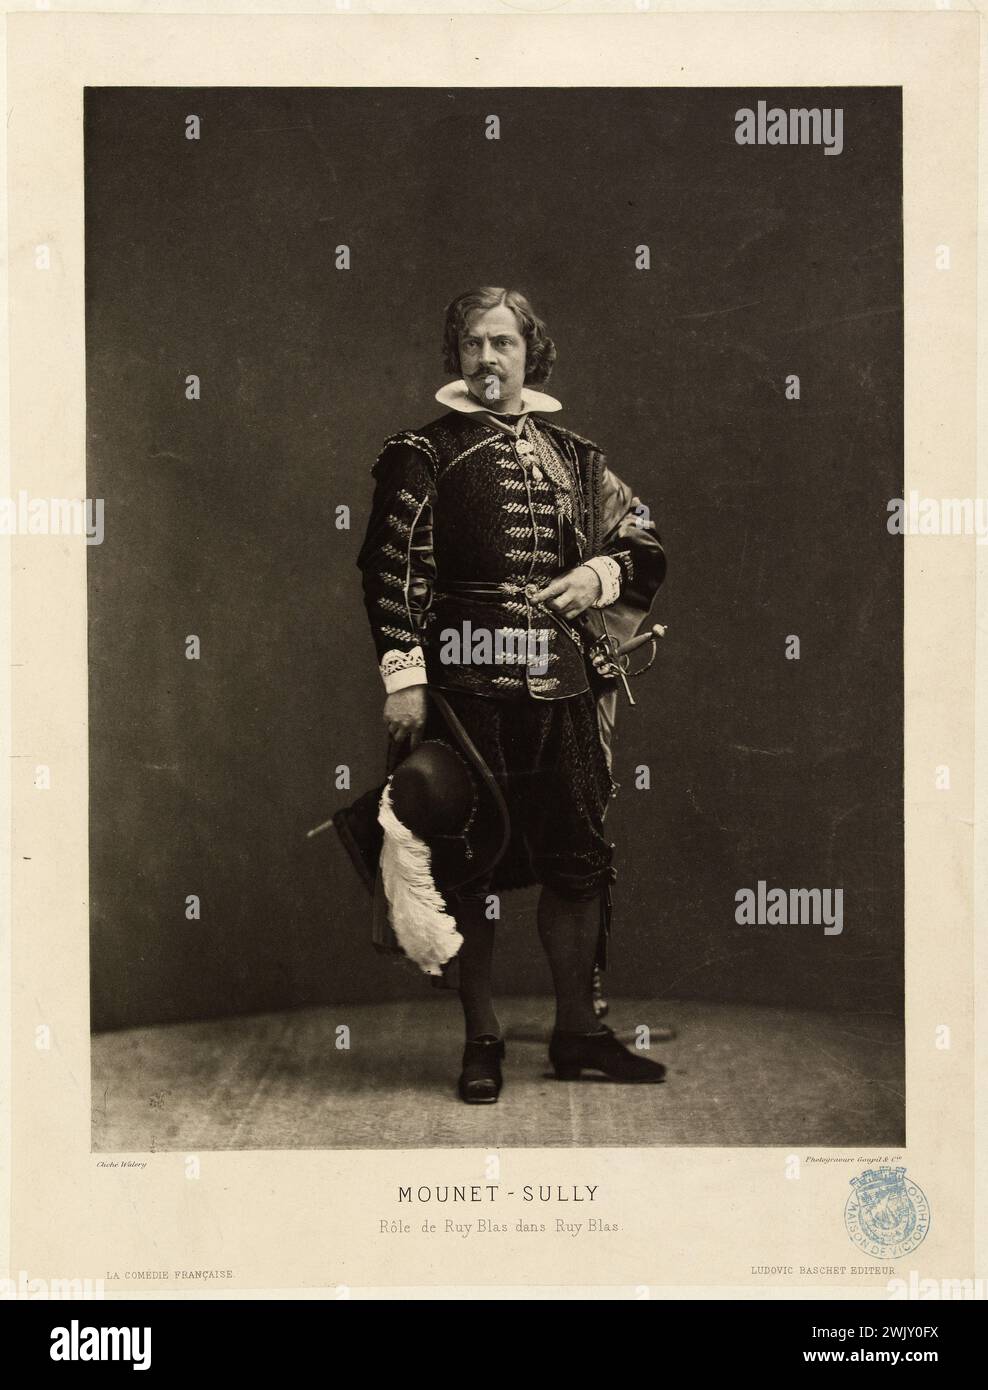 Goupil engraver from a photo of Lucien Waléry (1830-1890). Mounet-Sully (1863-1935) in the role of Ruy-Blas, representation at the Comédie-Française, April 4, 1879. Photogravure. 1879. Paris, house of Victor Hugo. 77378-29 Actor, cheminee, comedy-francaise, scene costume, 1st i 1er 1 arrondissement, representation, French tragedian, photogravure, piece, scene Stock Photo